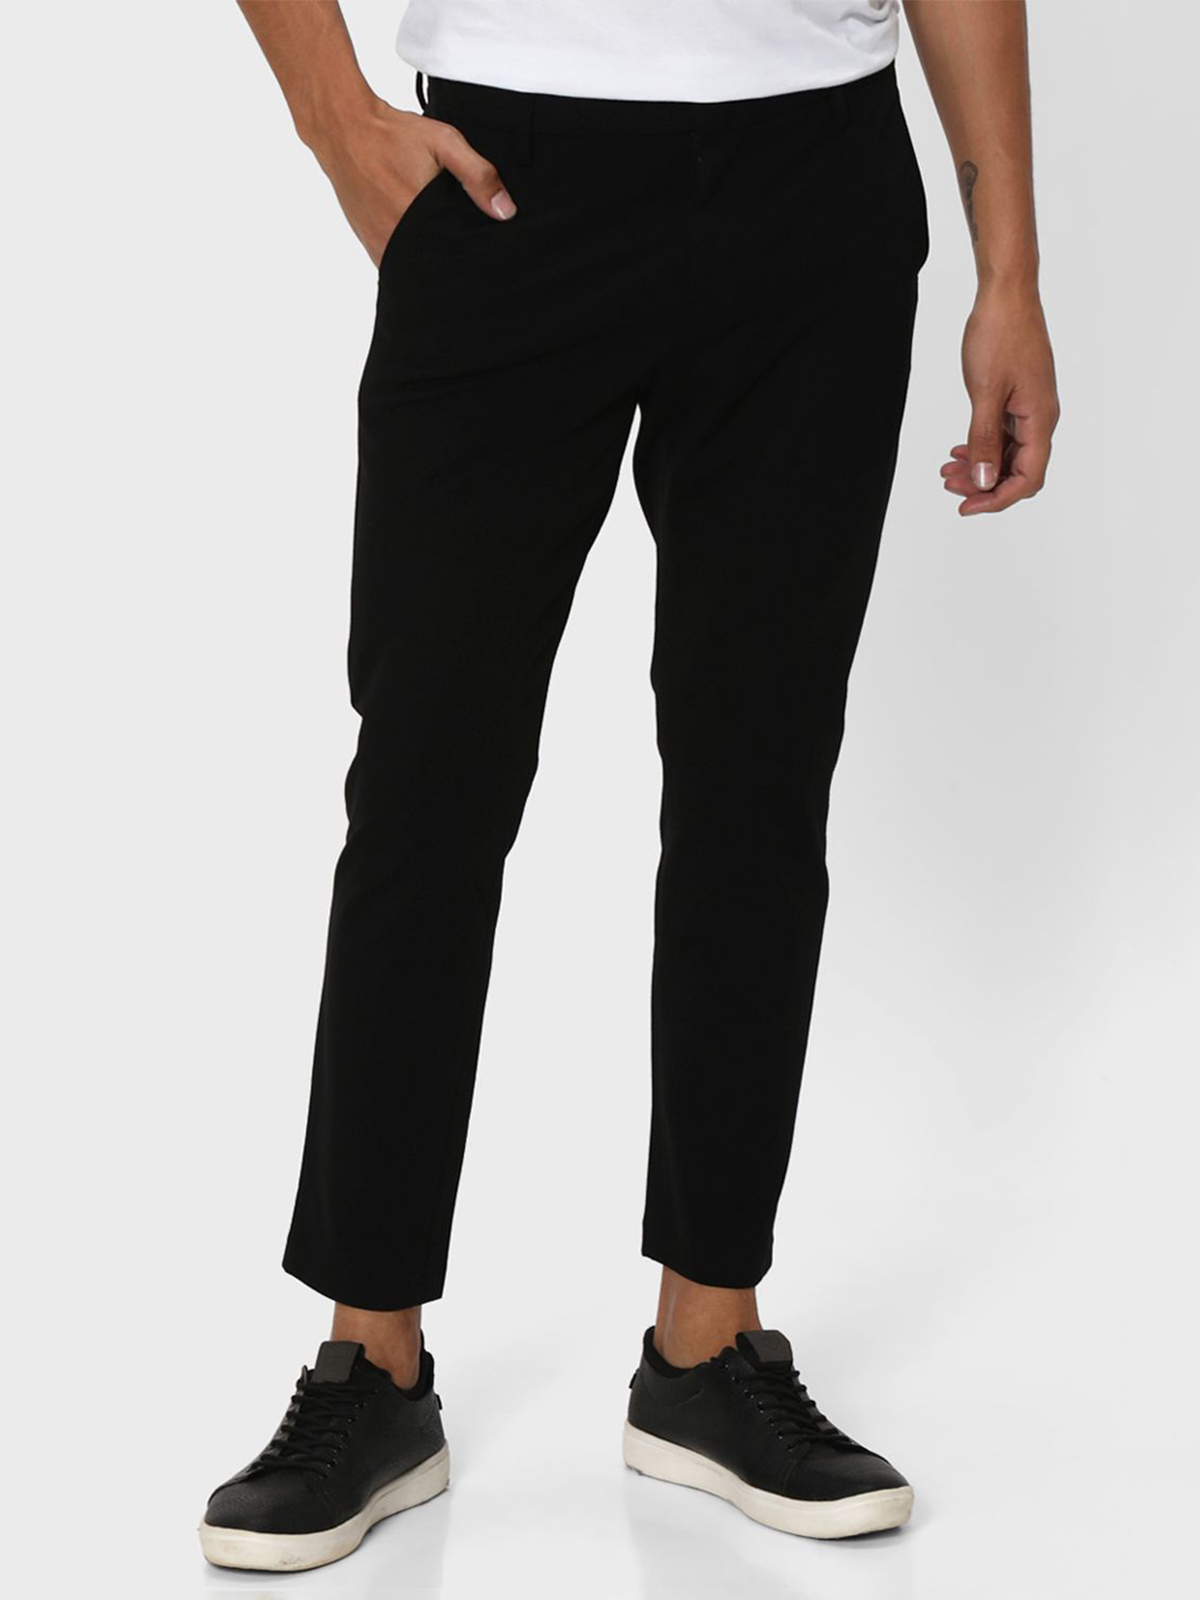 Buy MUFTI Solid Cotton Skinny Fit Men's Casual Trousers | Shoppers Stop